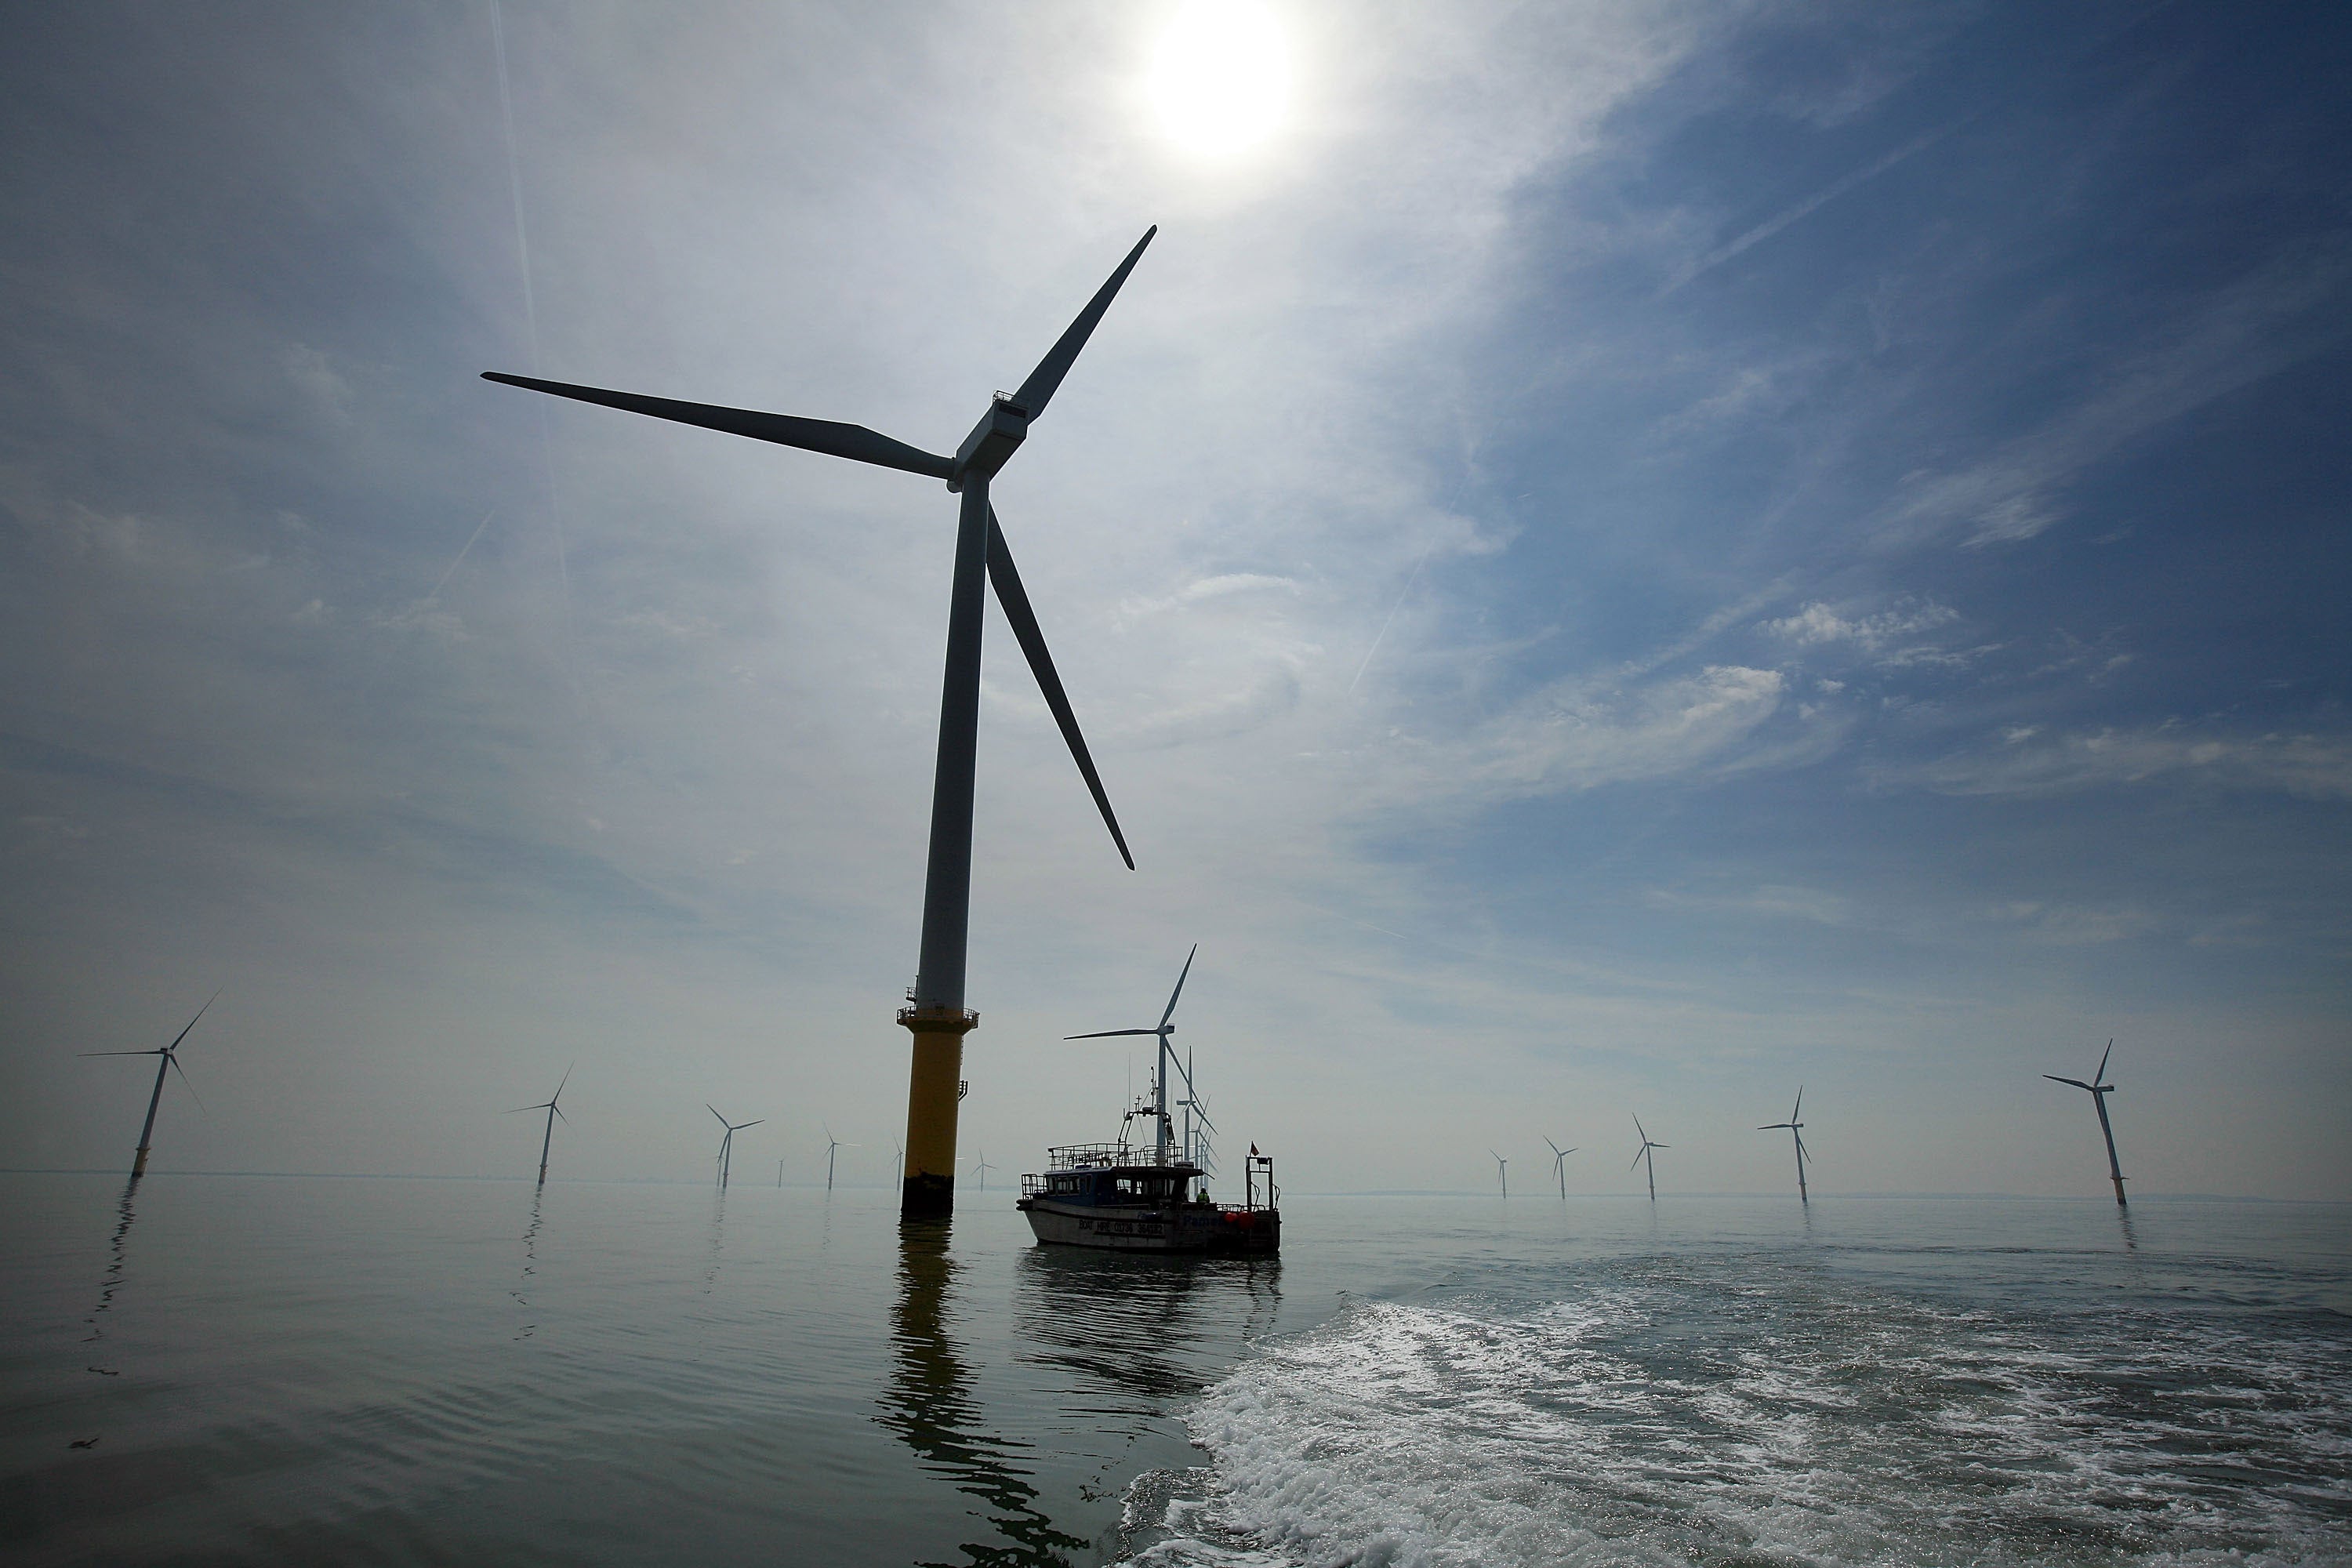 Nearly a quarter of UK’s electricity came from wind turbines in 2020